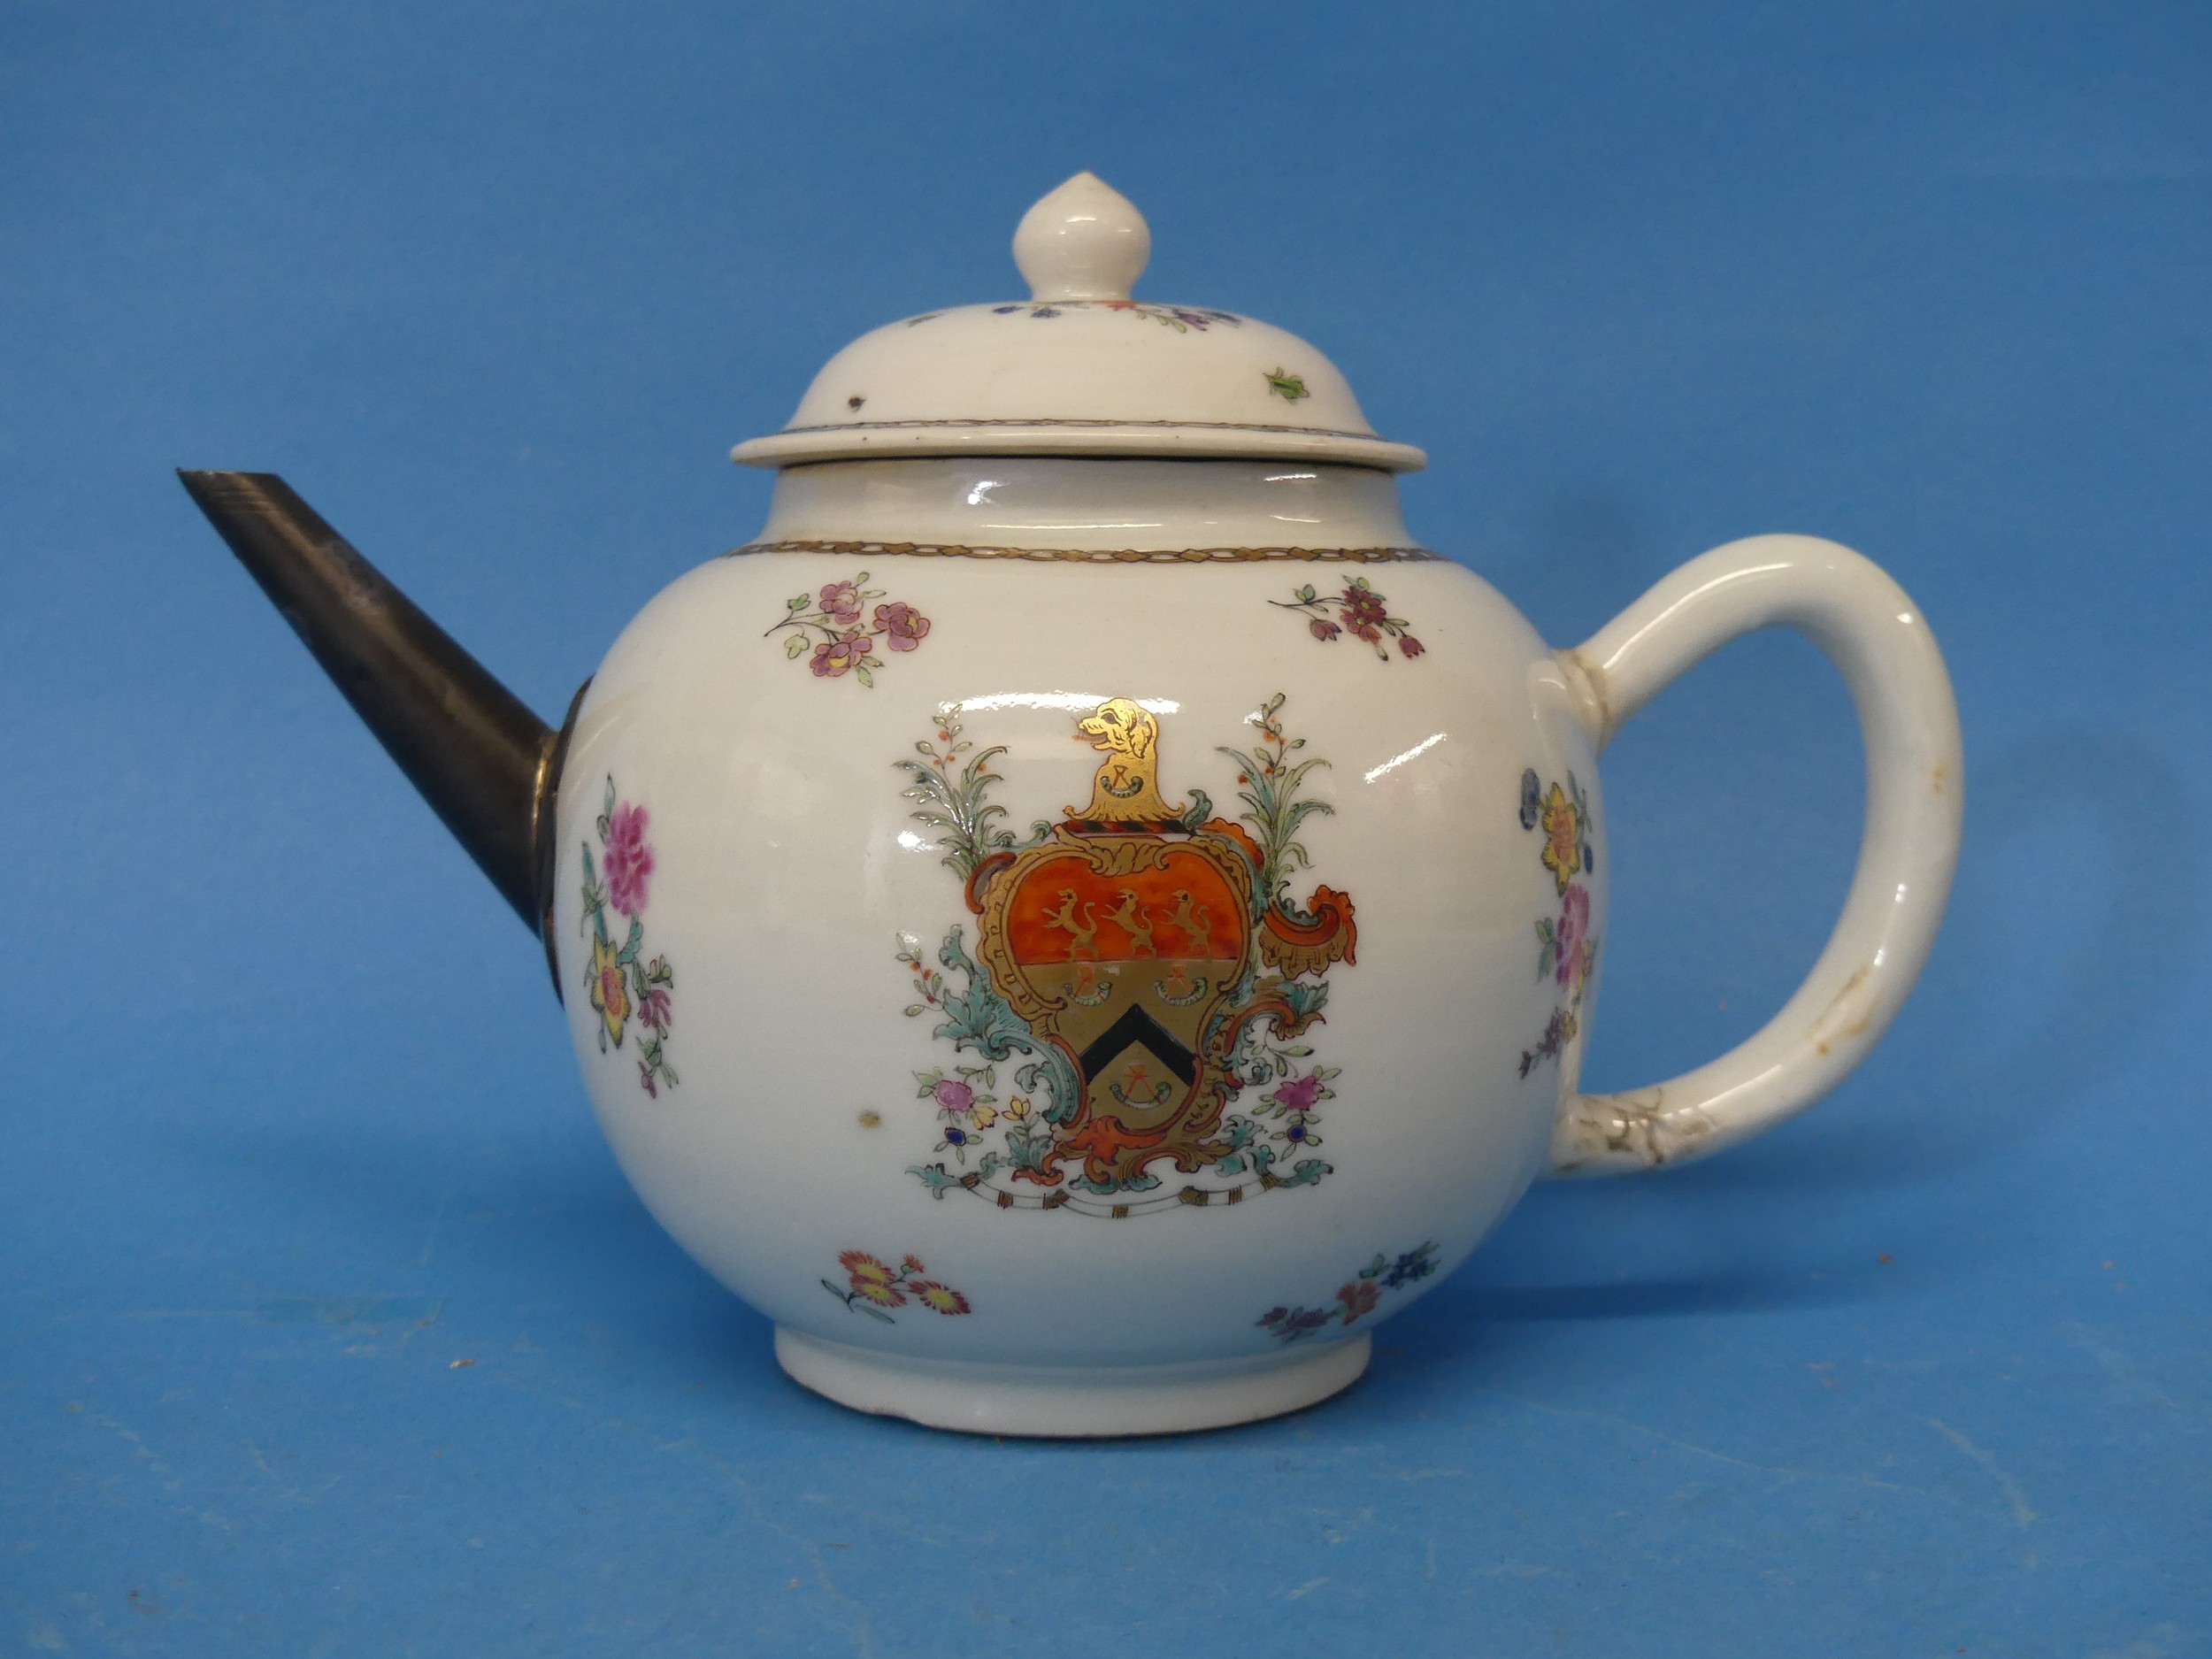 An 18thC Chinese Export Armorial Teapot, decorated in floral sprays with central crest and gilded - Image 5 of 16